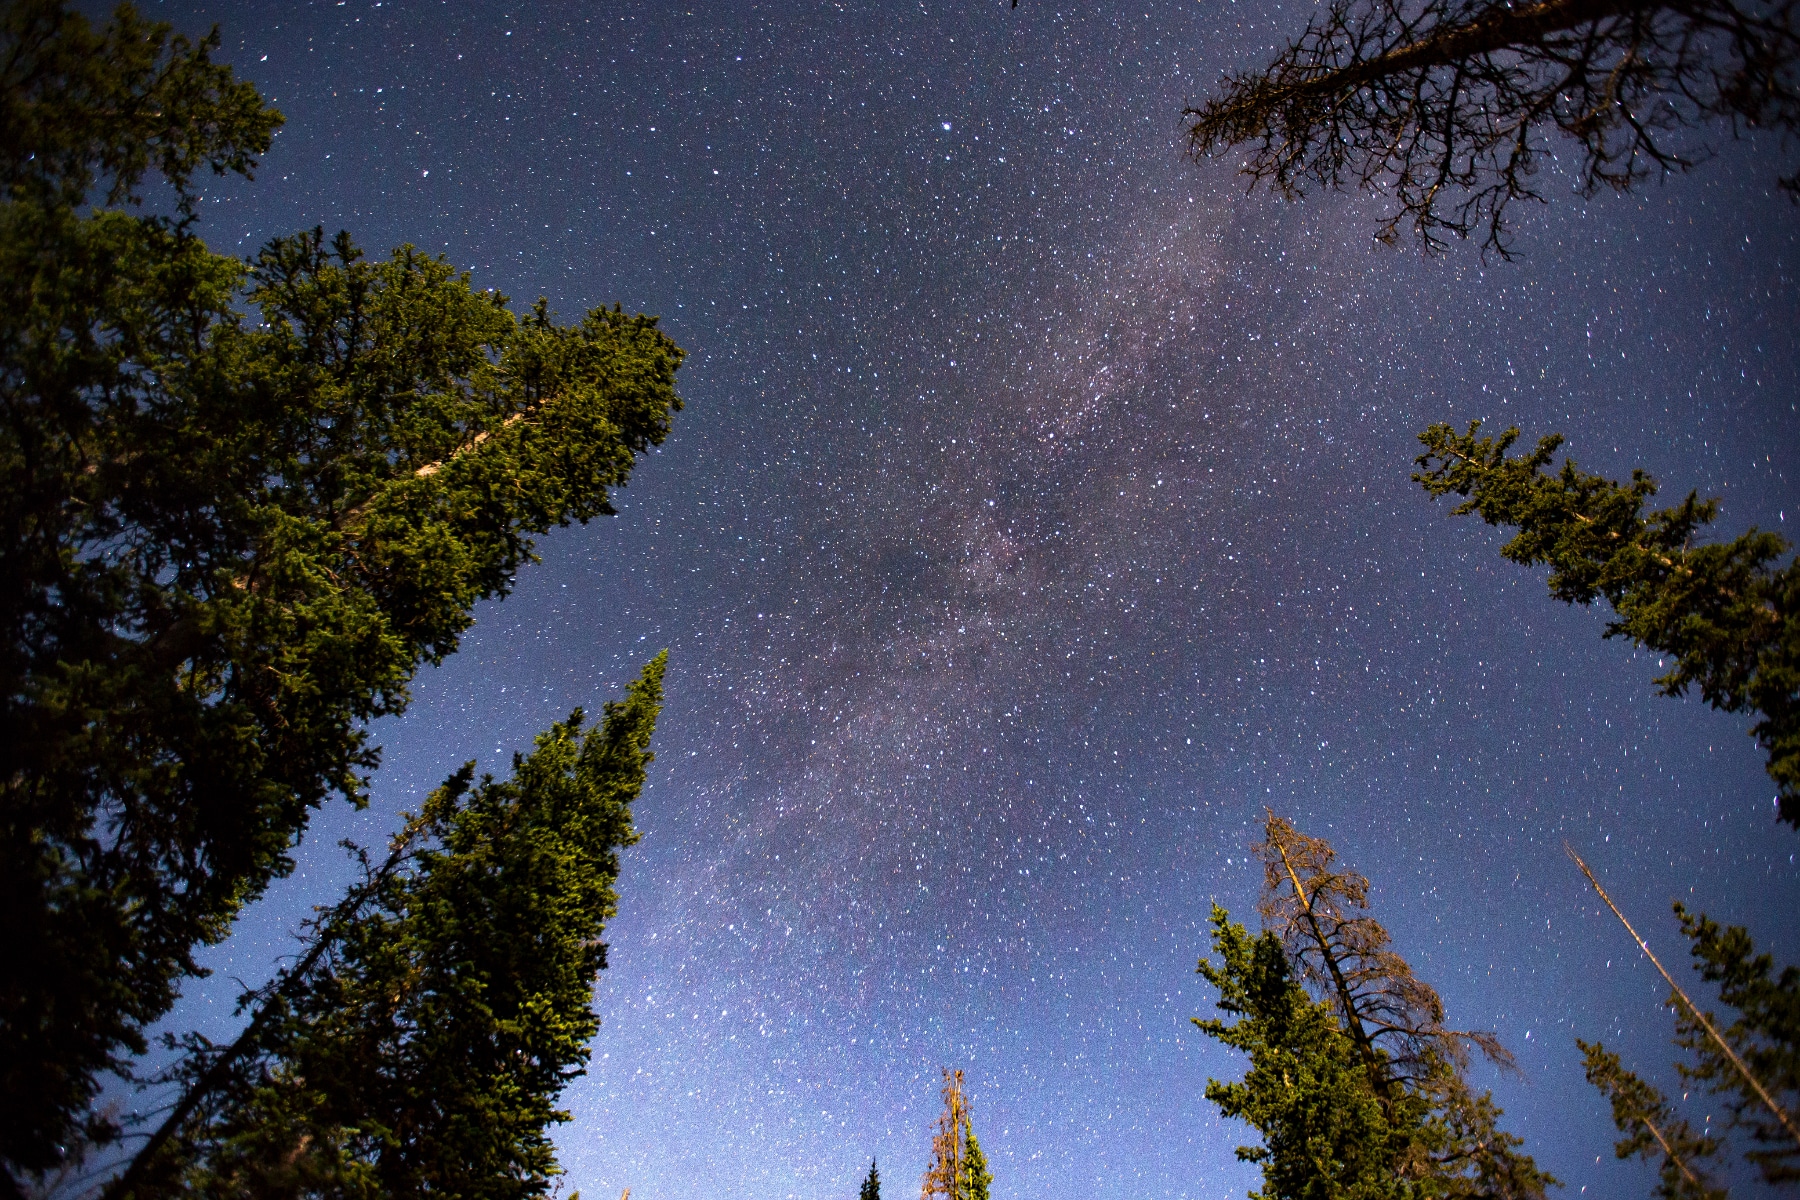 A view from the forest floor looking up through treetops at the darkest skies with stars shining brightly.